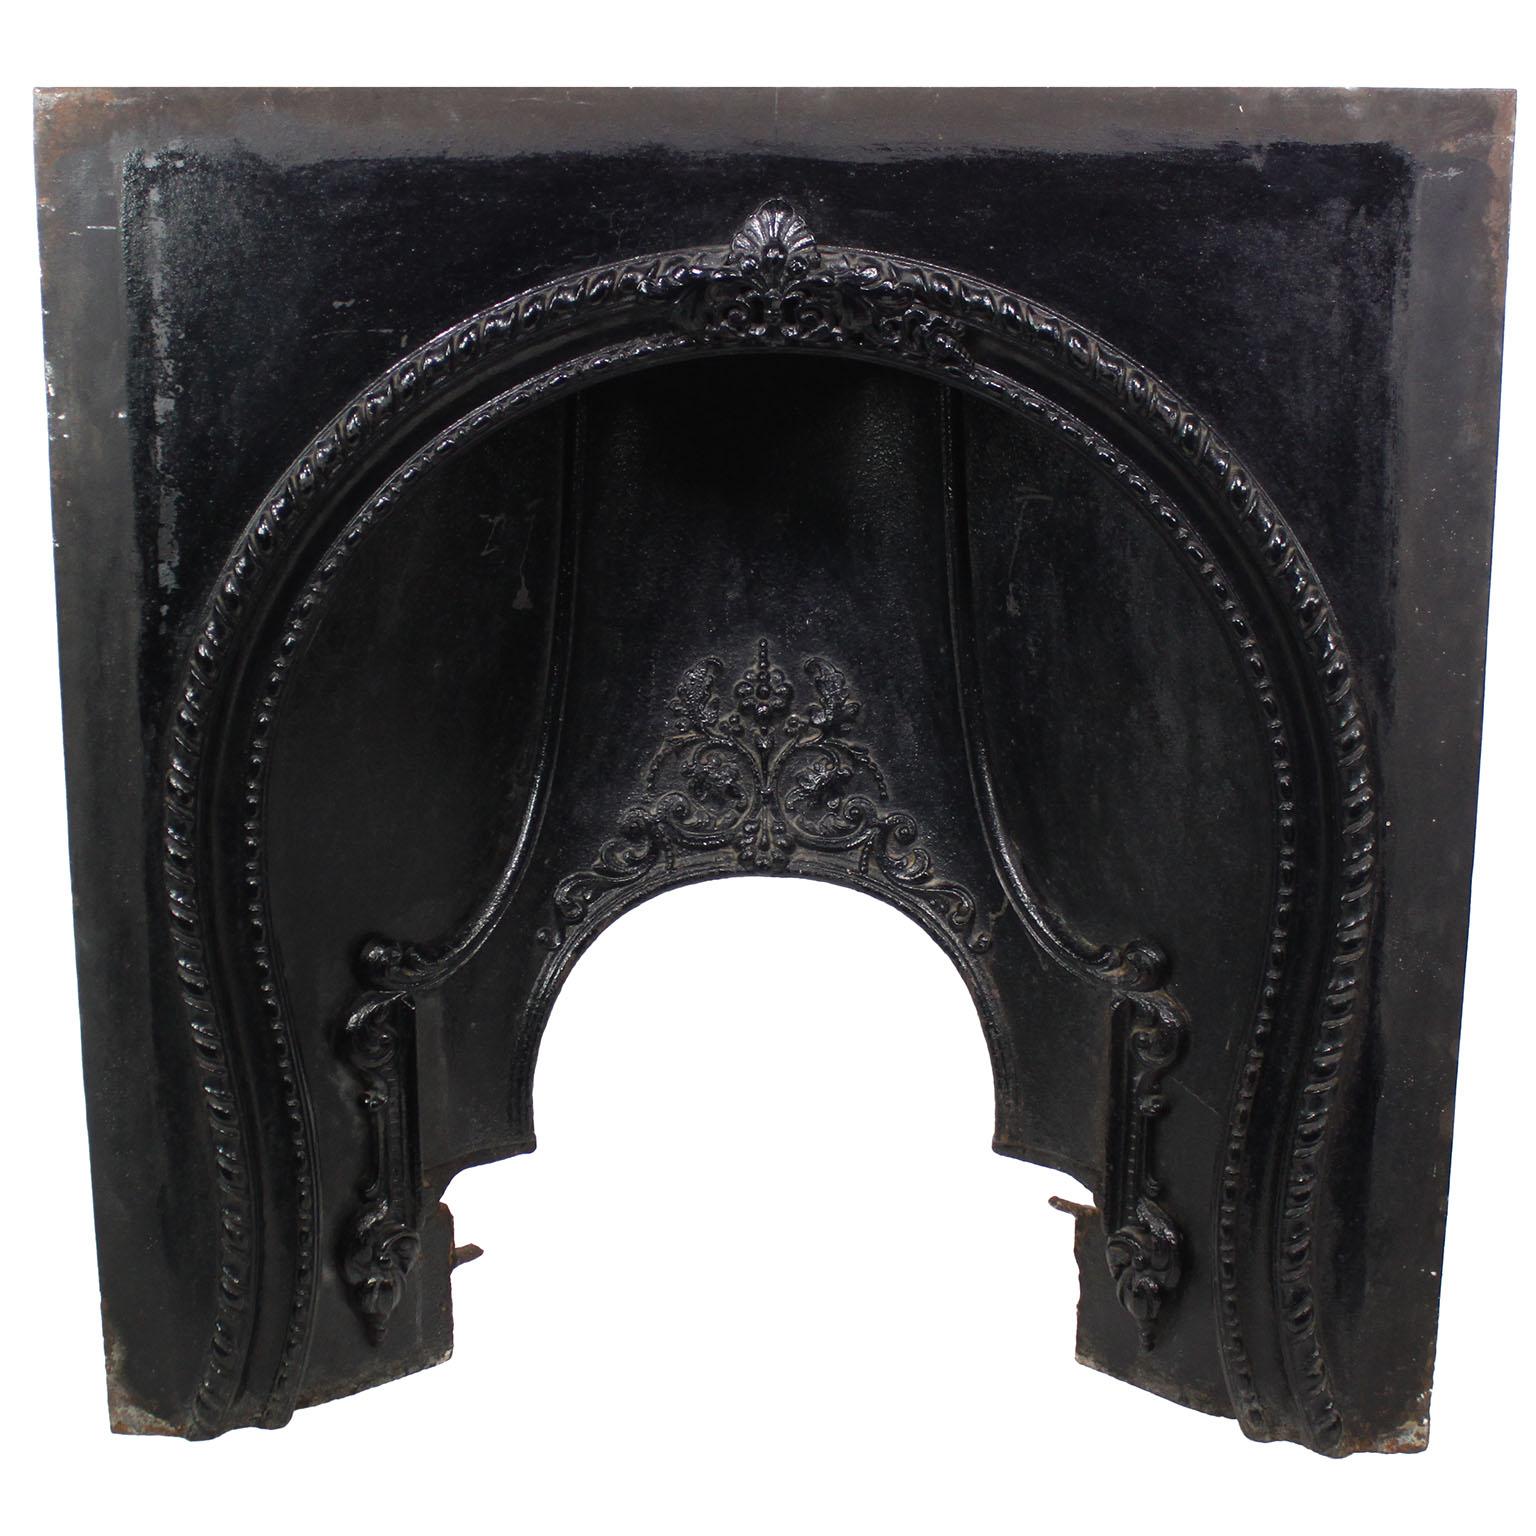 A French 19th Century Cast Iron and Metal Fireplace Mantel Wood/Coal Register Insert Grate. Circa: 1870-1880

Height: 35 7/8 inches (91.1 cm)
Width: 36 inches (91.5 cm)
Depth: 14 inches (35.6 cm)